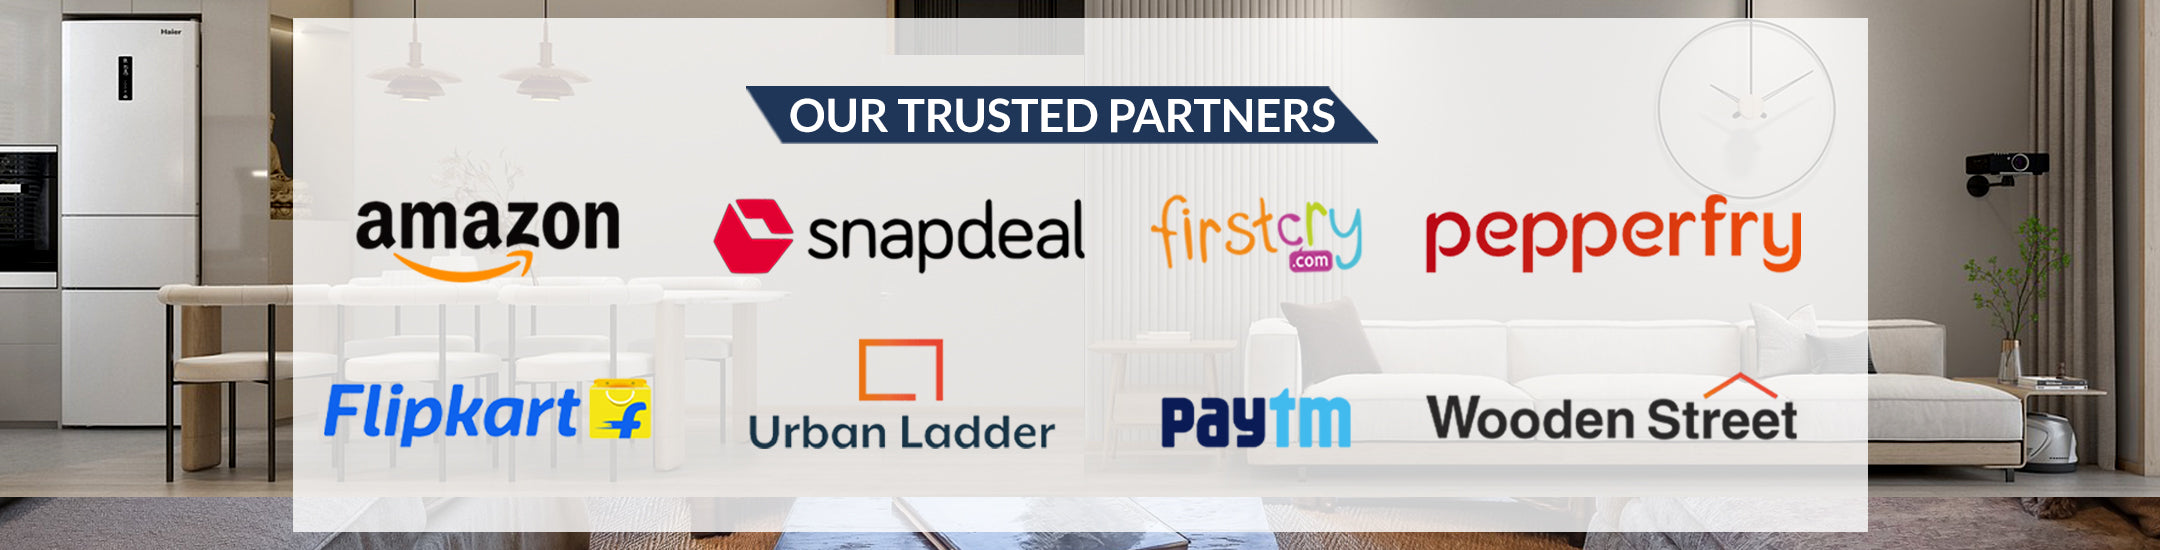 Our Trusted Partners